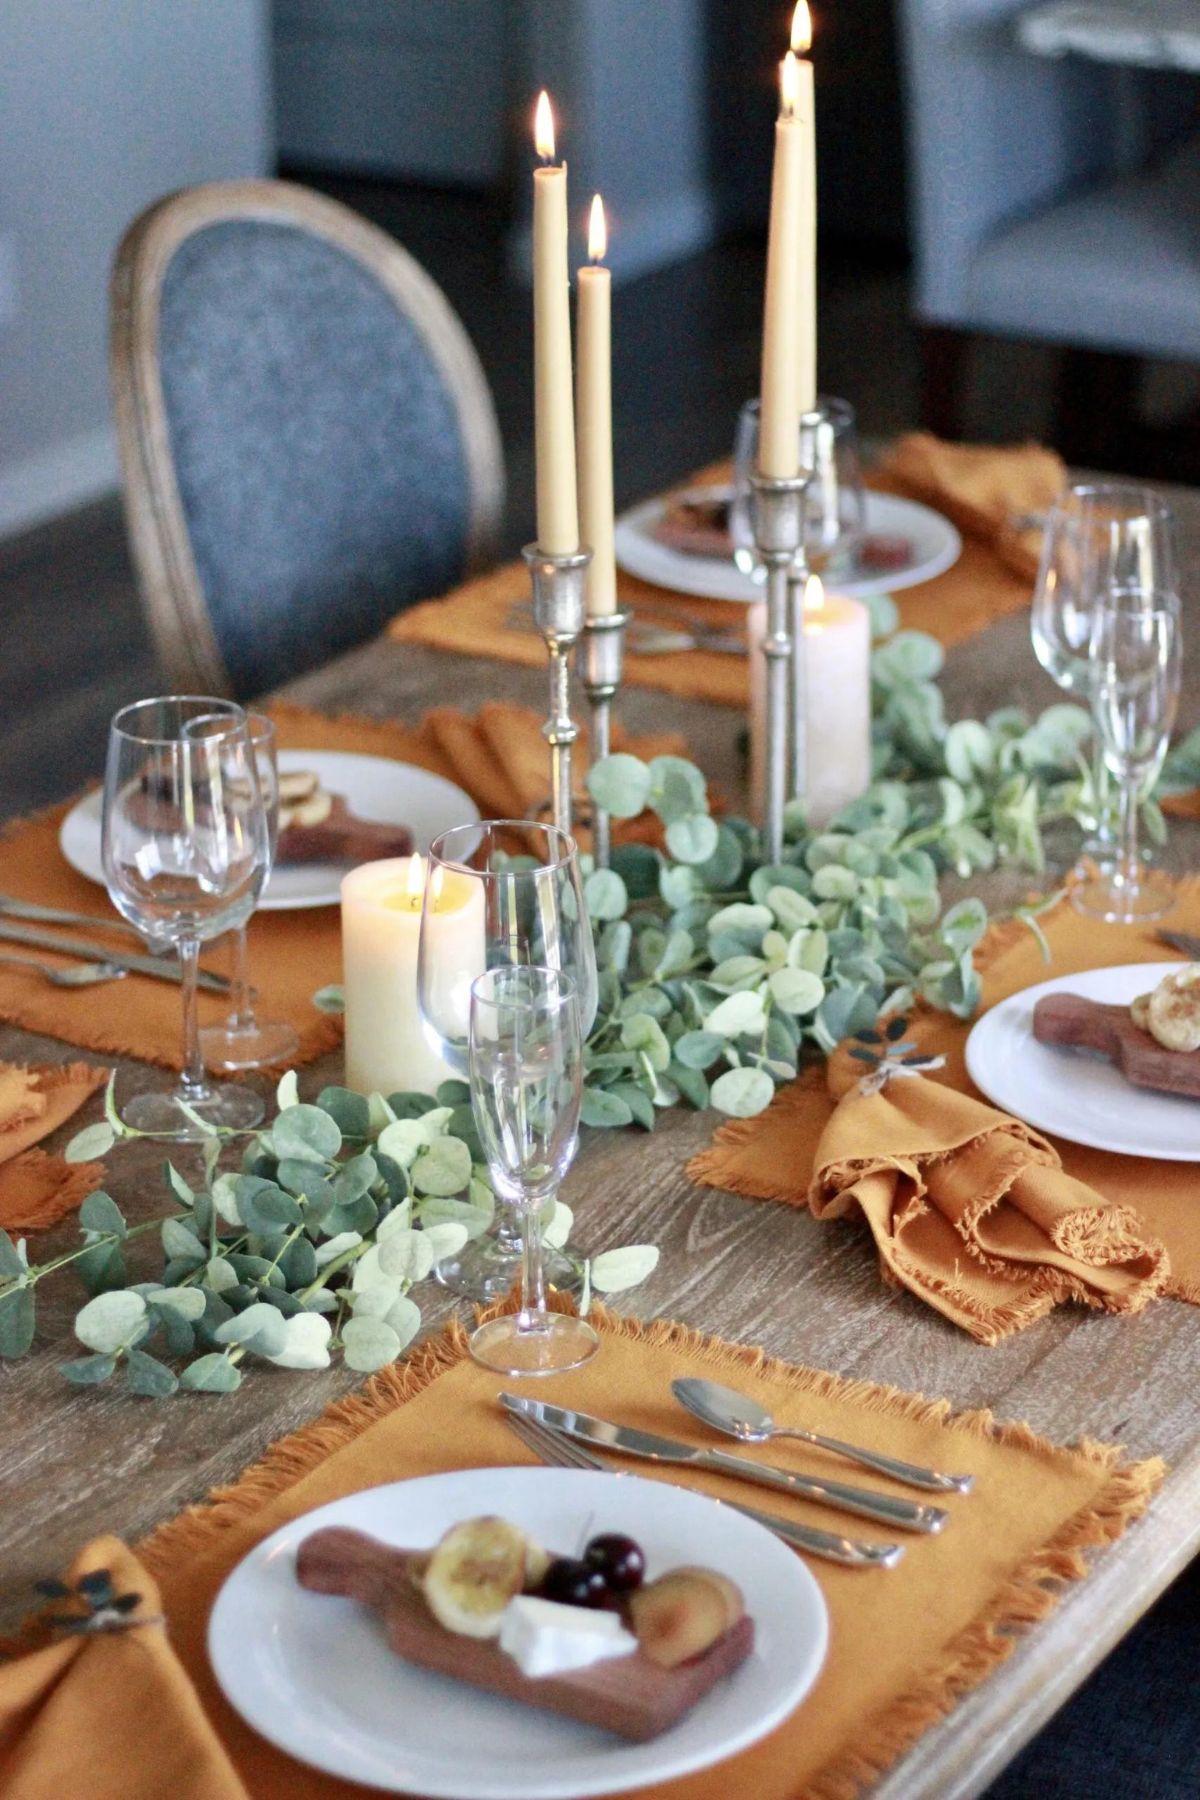 DIY Thanksgiving Decor: Top 20 Step-by-step Guide (Part 2)